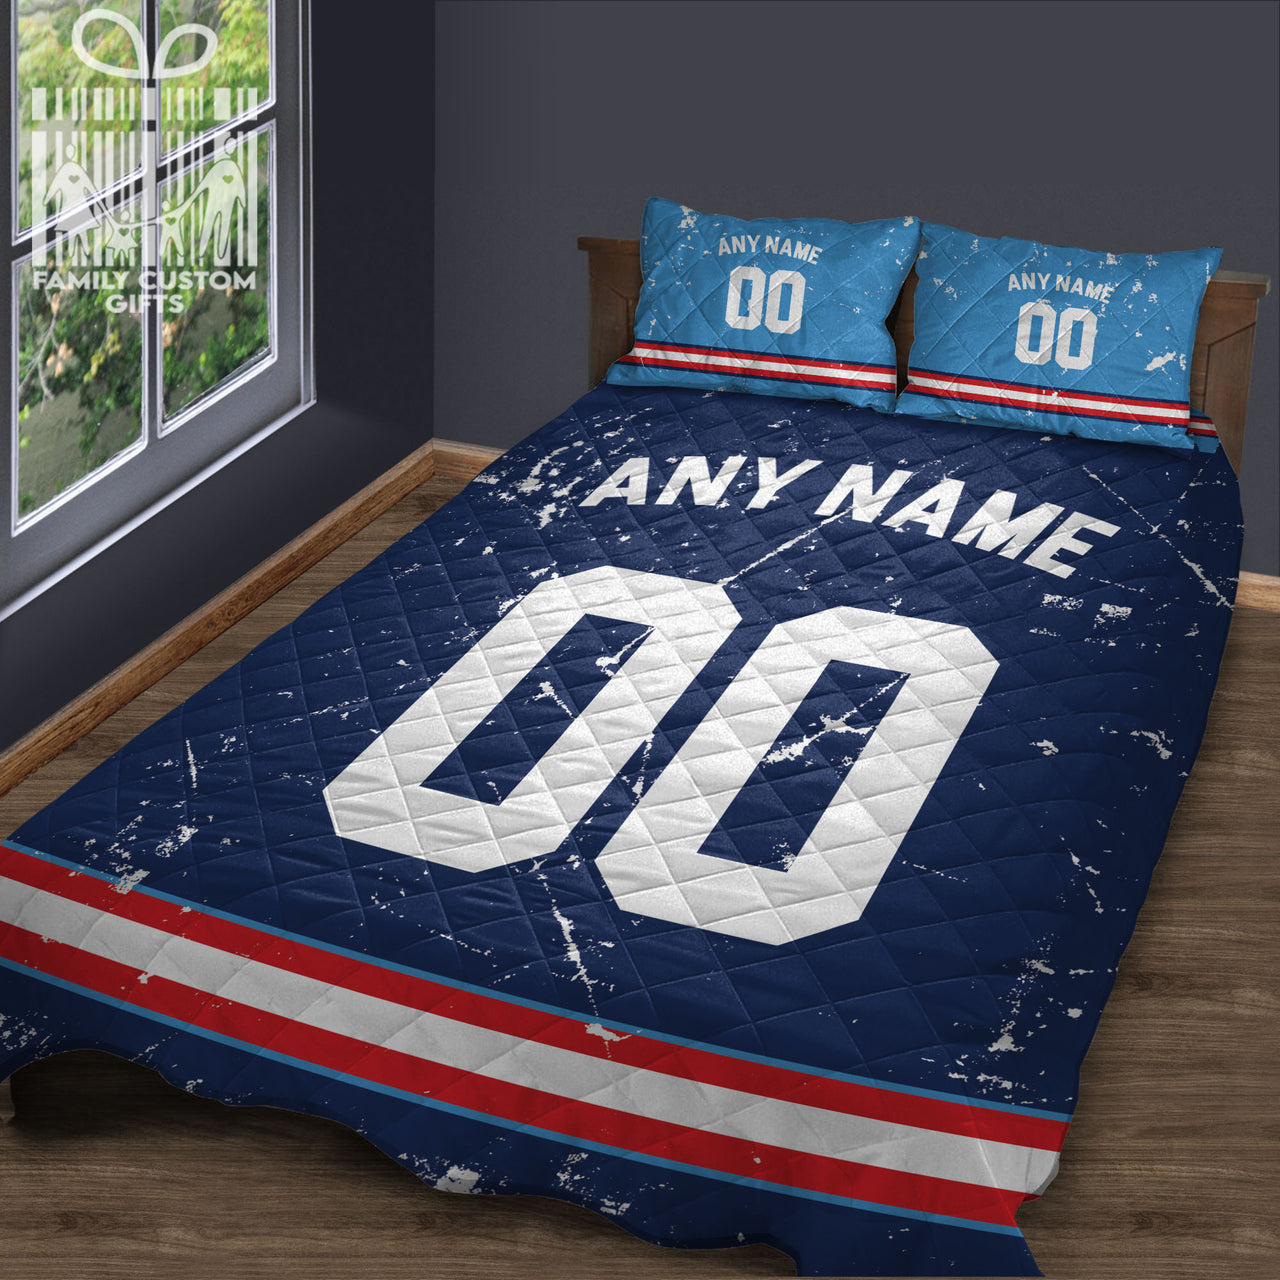 Custom Quilt Sets Tennessee Jersey Personalized Football Premium Quilt Bedding for Men Women